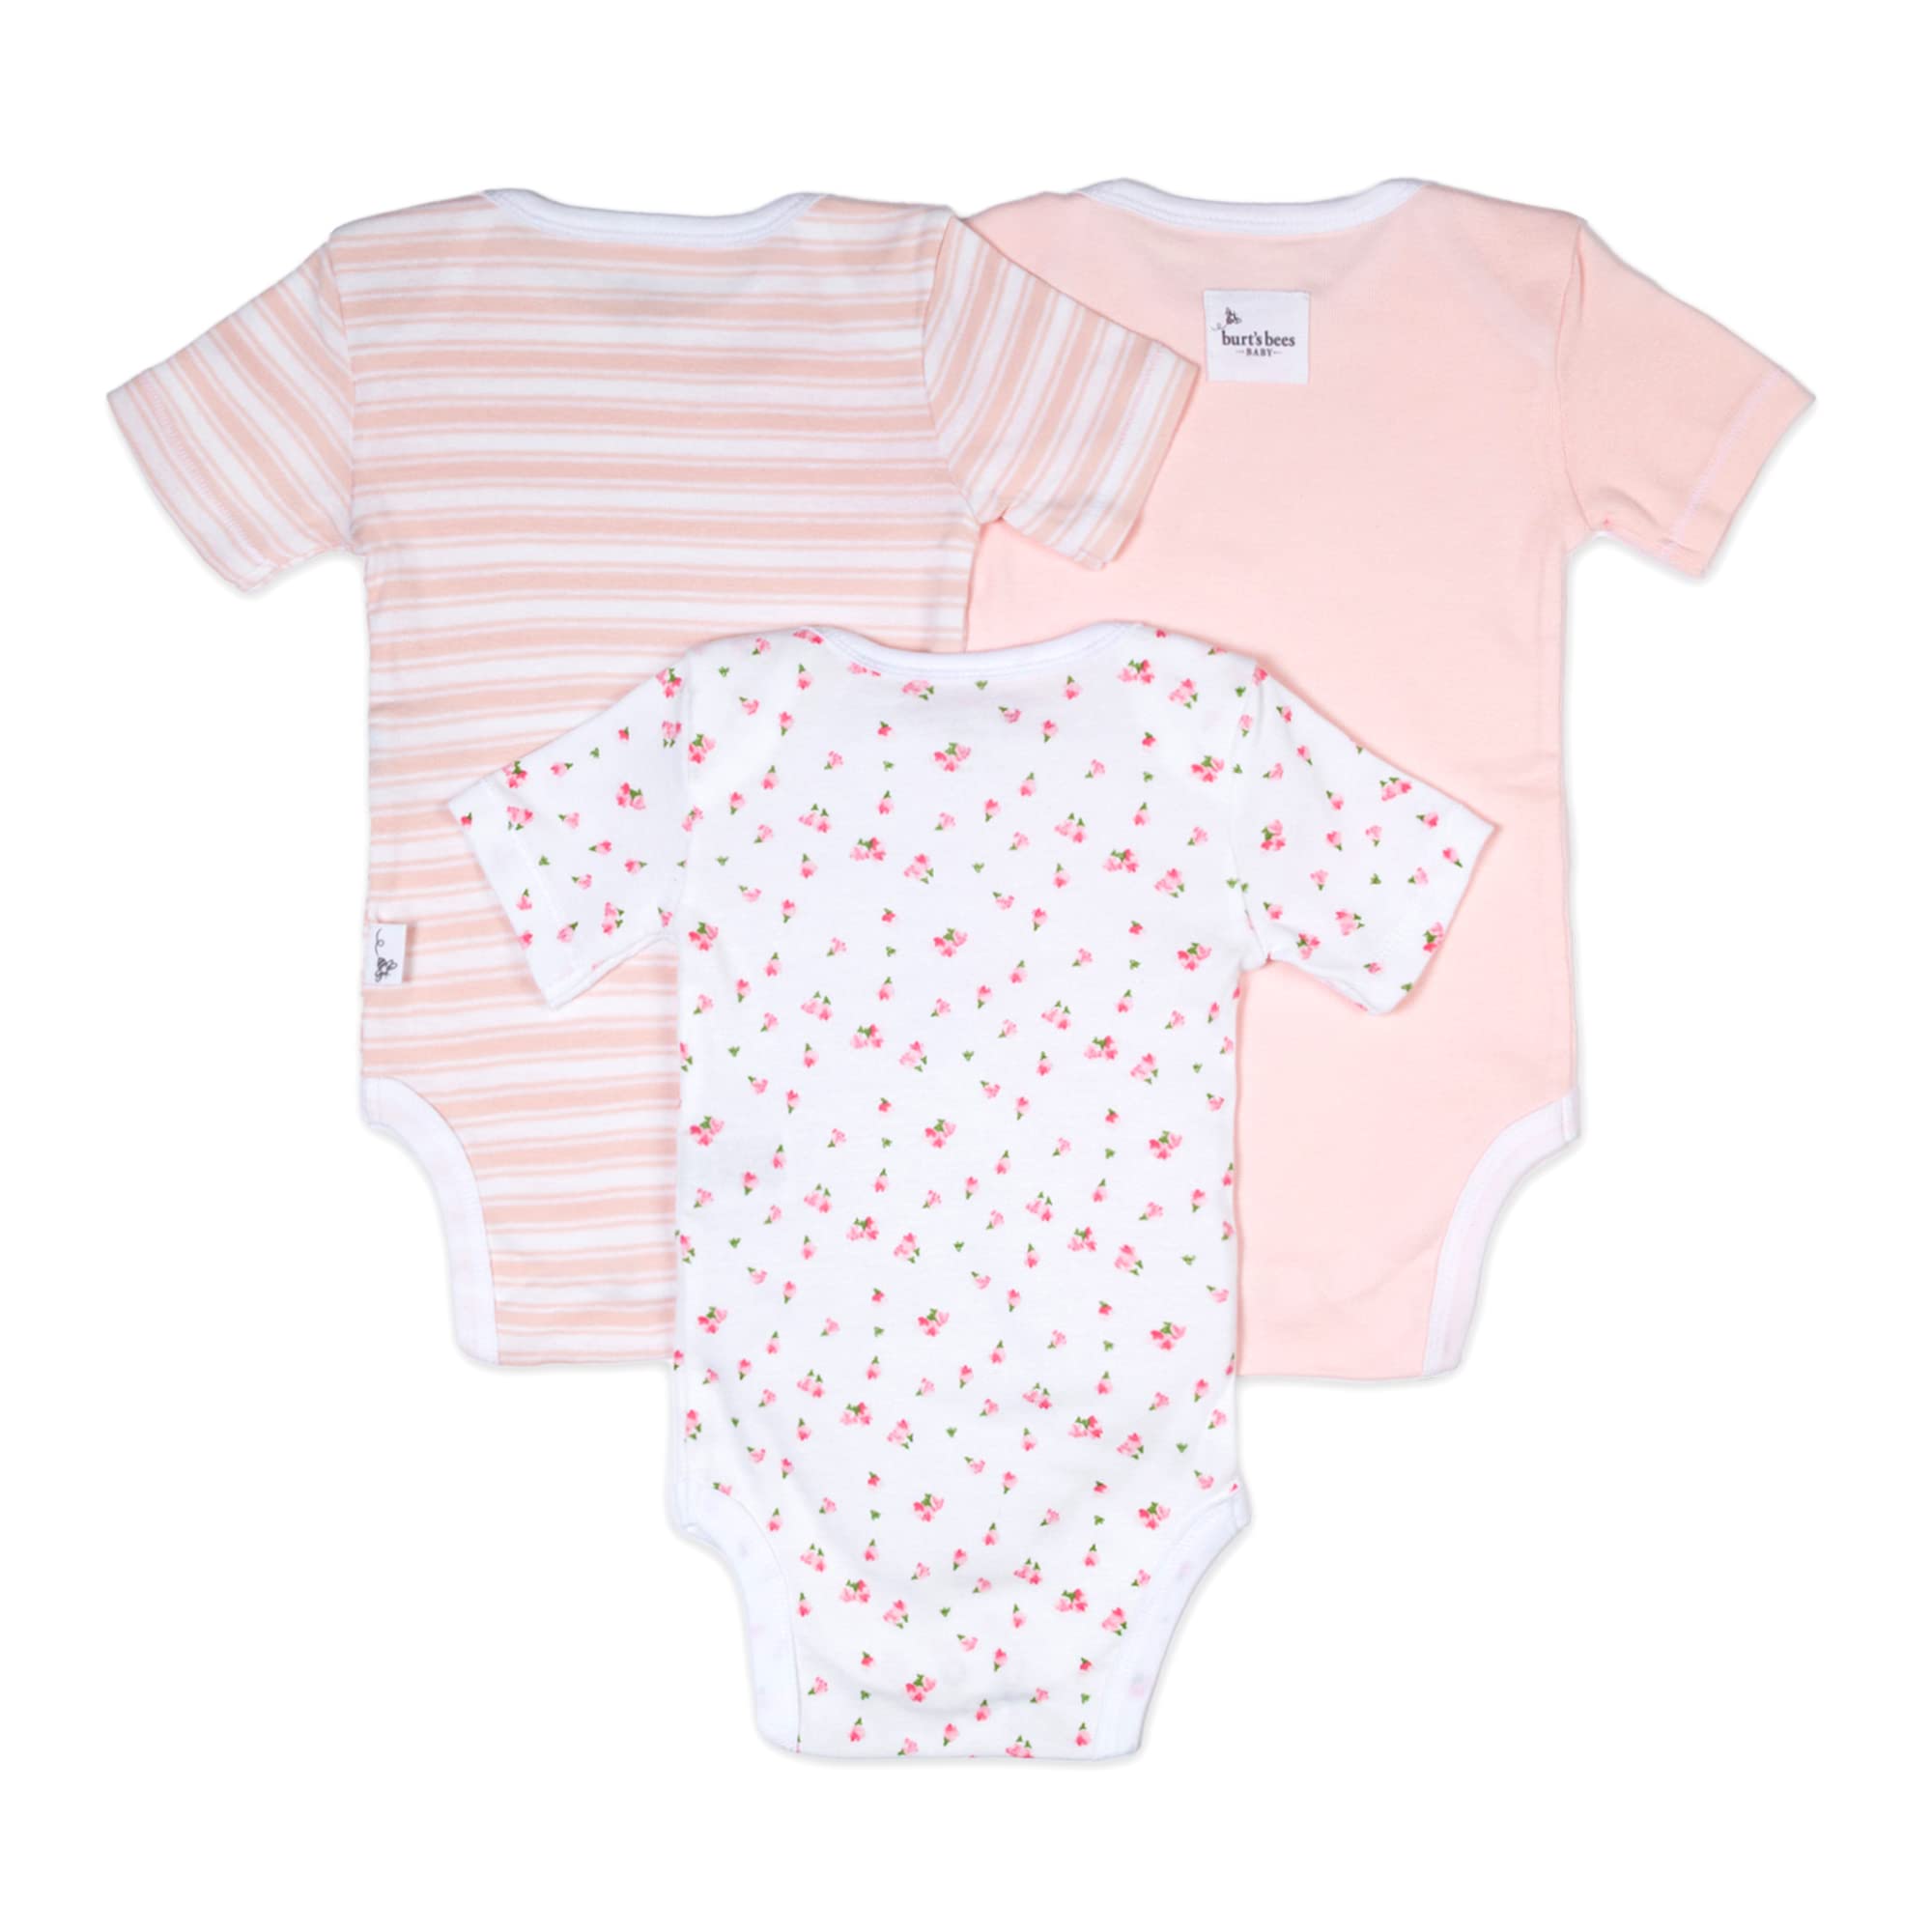 Burt's Bees Baby unisex baby Bodysuits, 3-pack Long & Short-sleeve One-pieces, 100% Organic Cotton Bodysuit, Tossed Tulips, 3 Months US